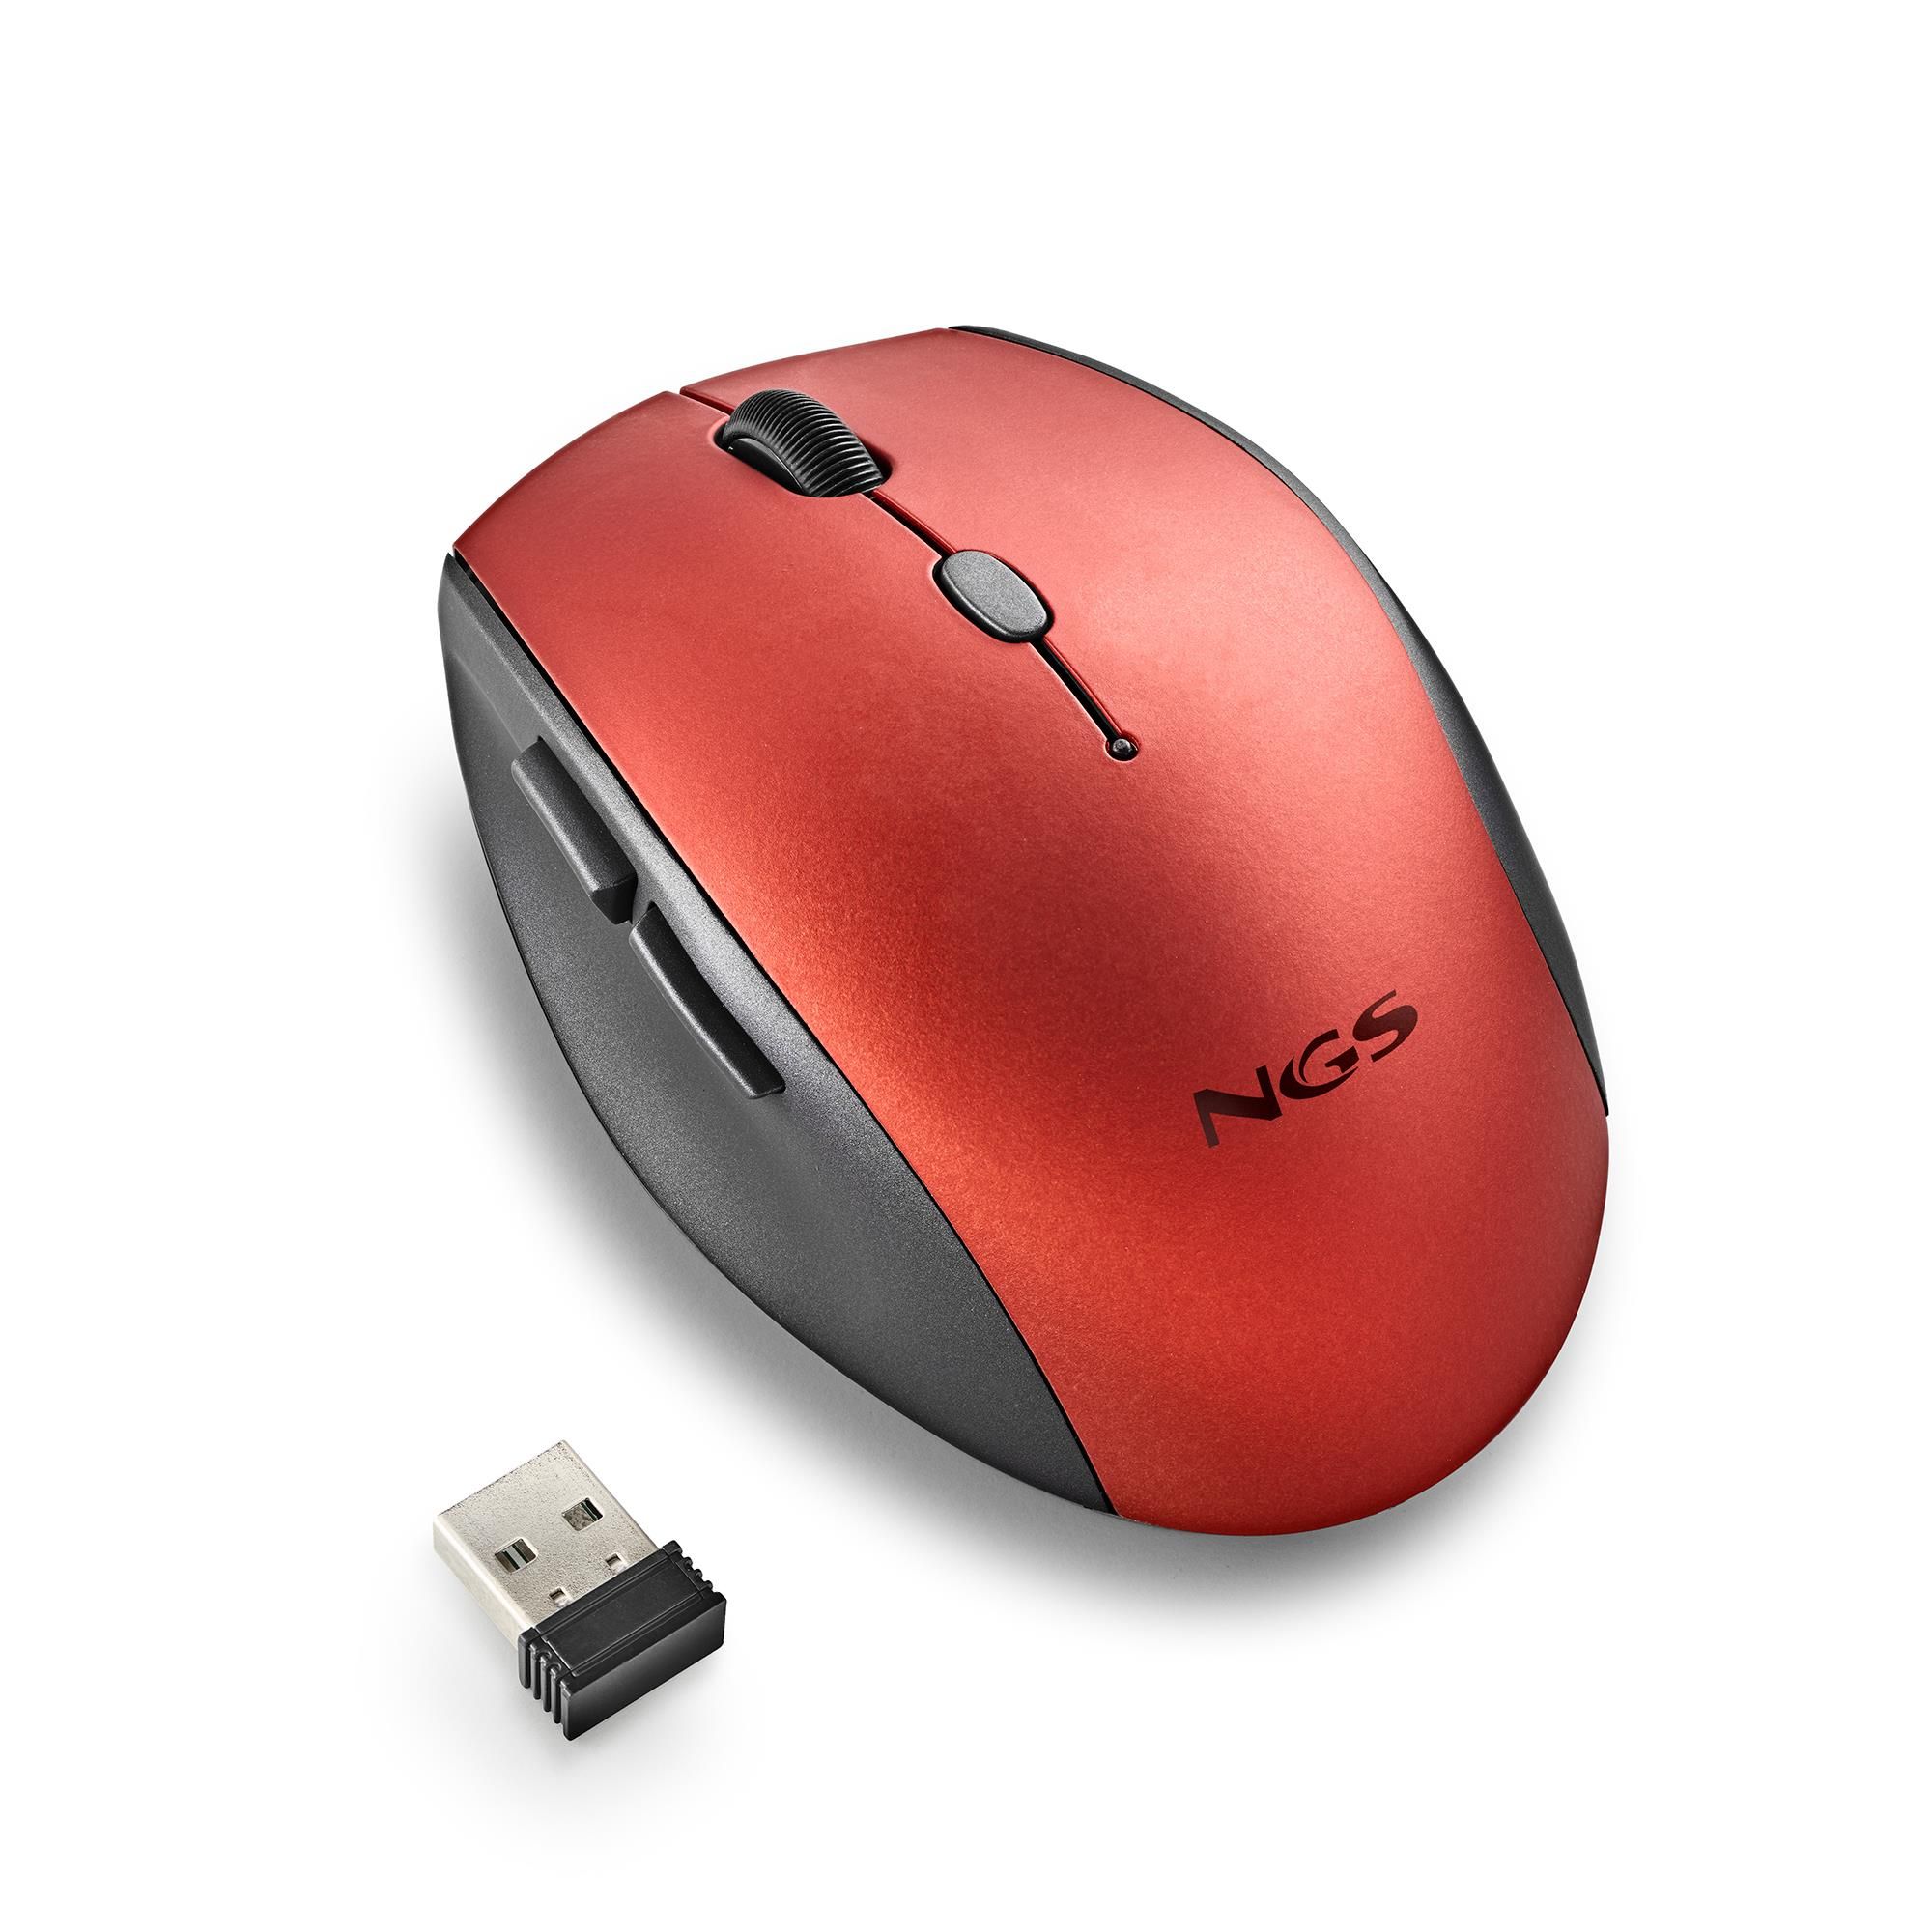 NGS-MOUSE-1230 Foto: 3